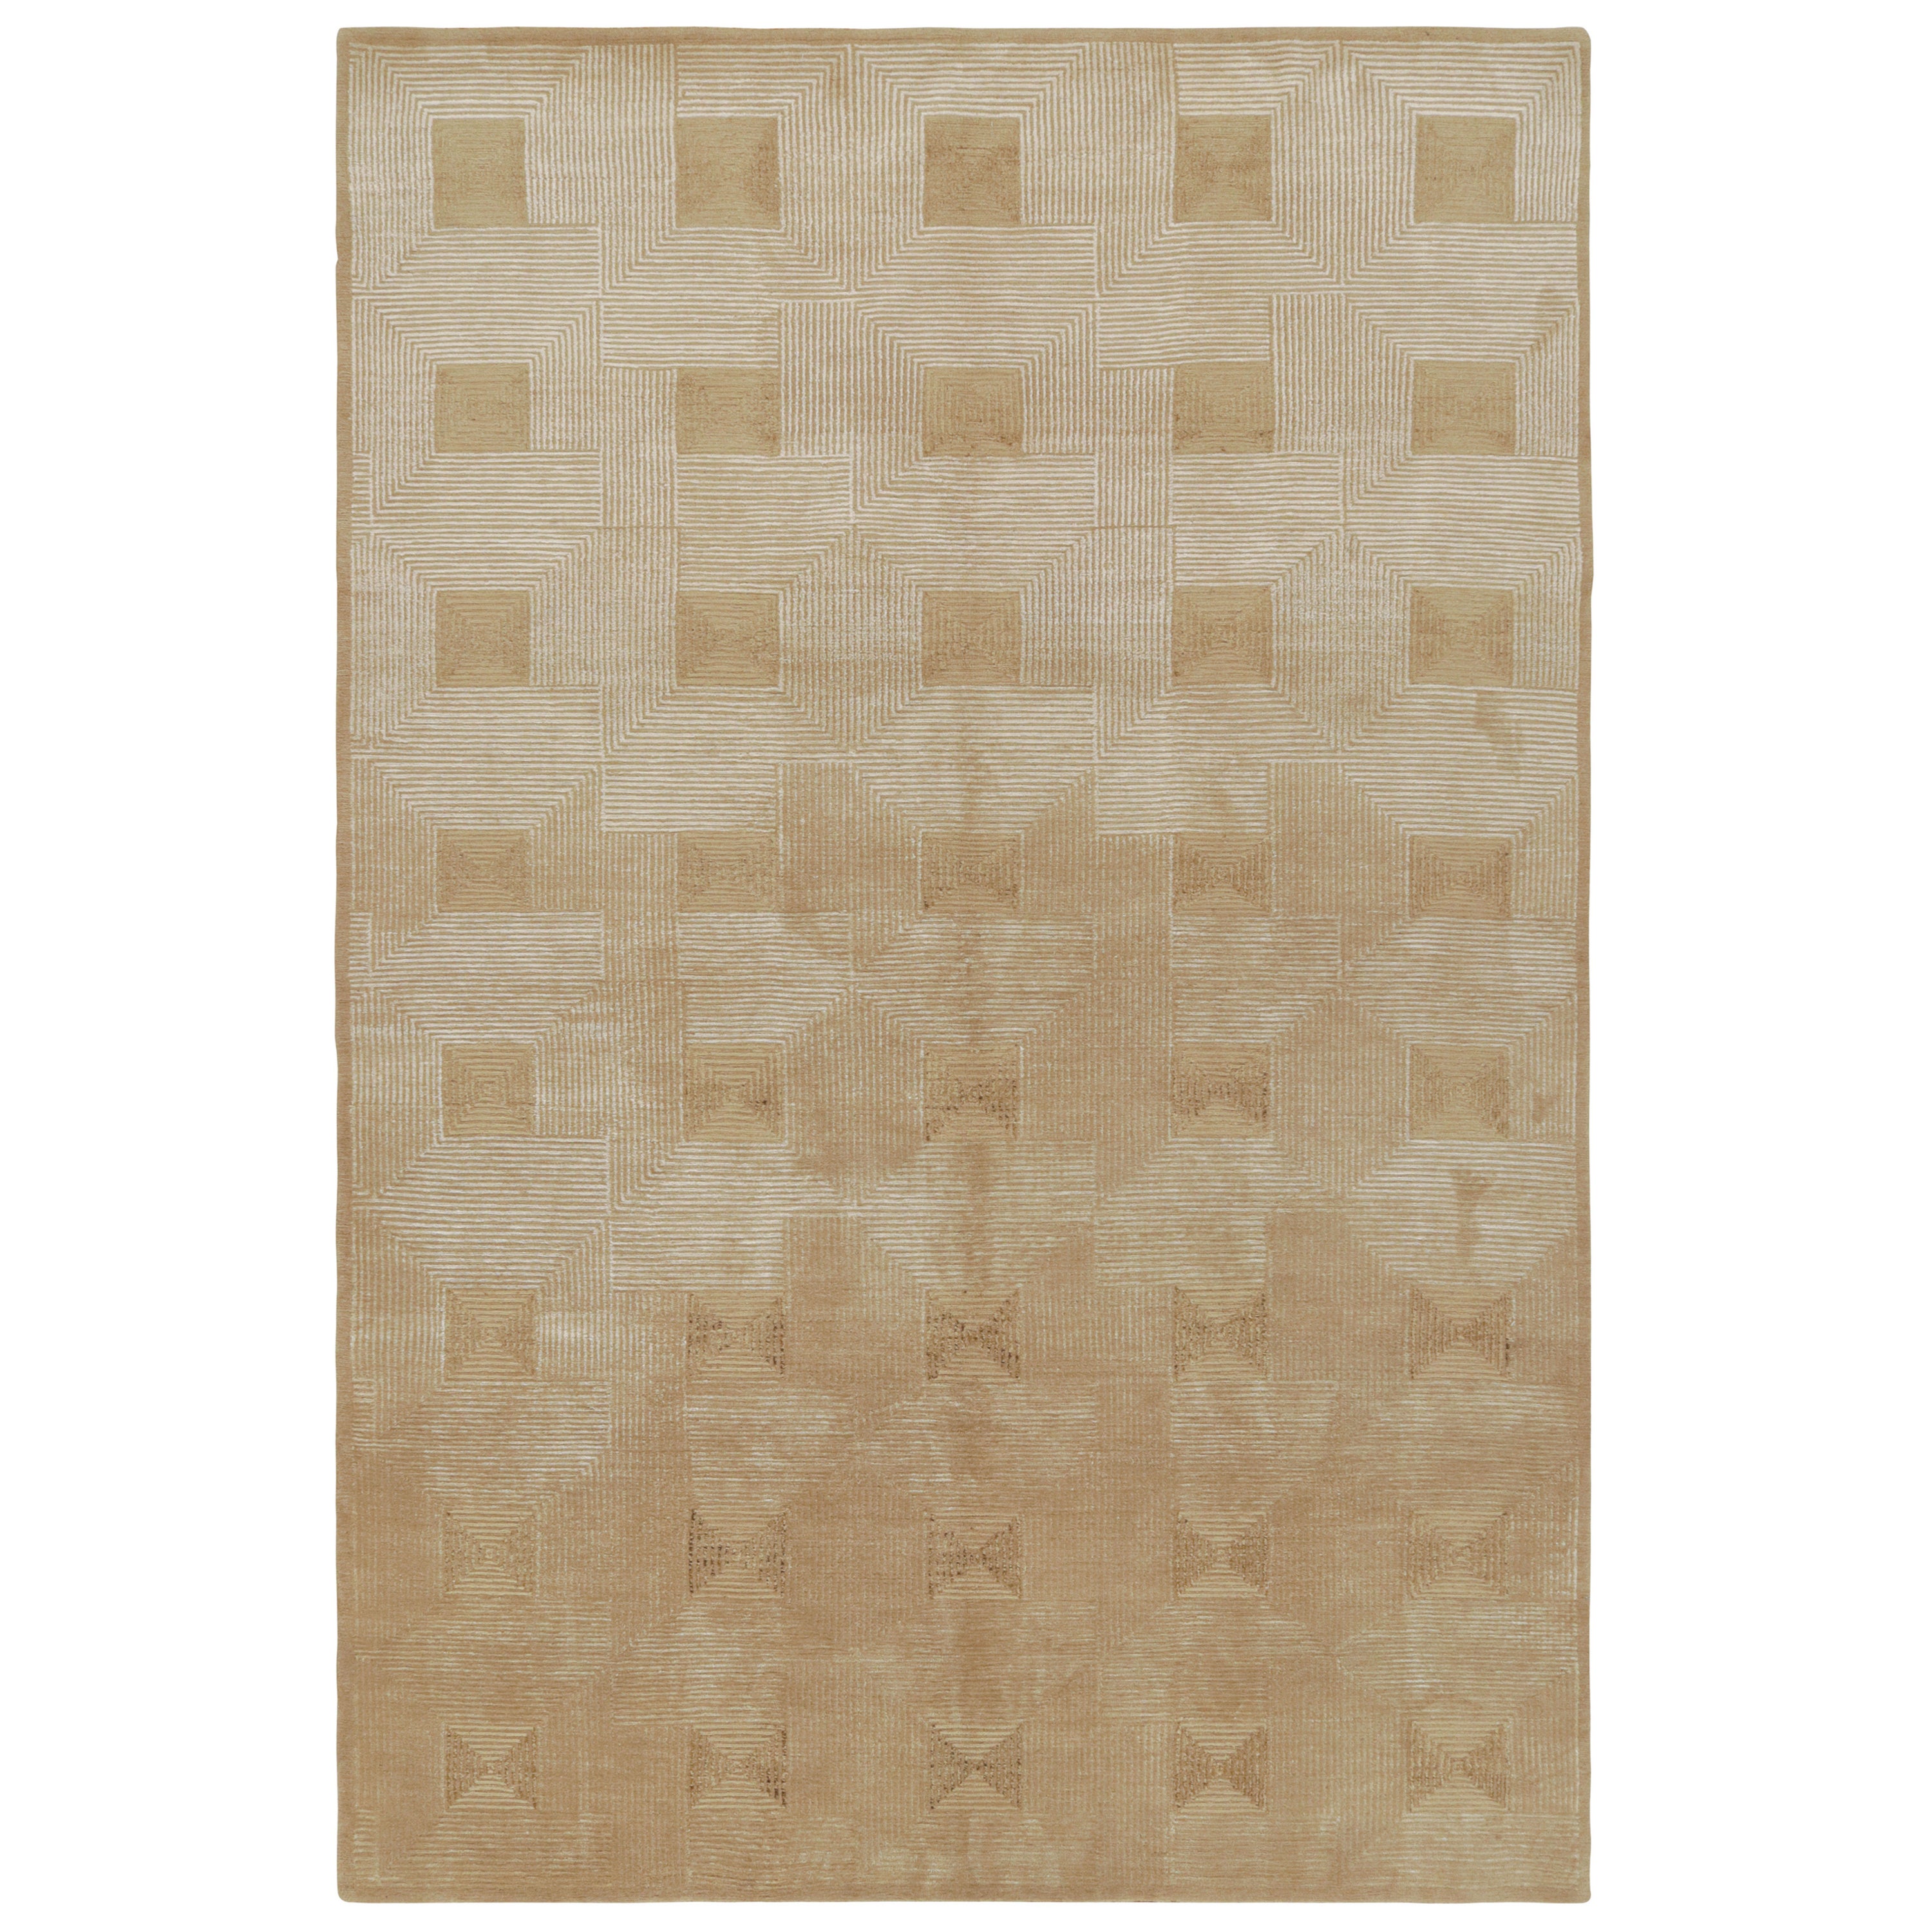 Rug & Kilim’s Cubist Art Deco Style Rug in Beige-Brown Geometric Patterns For Sale